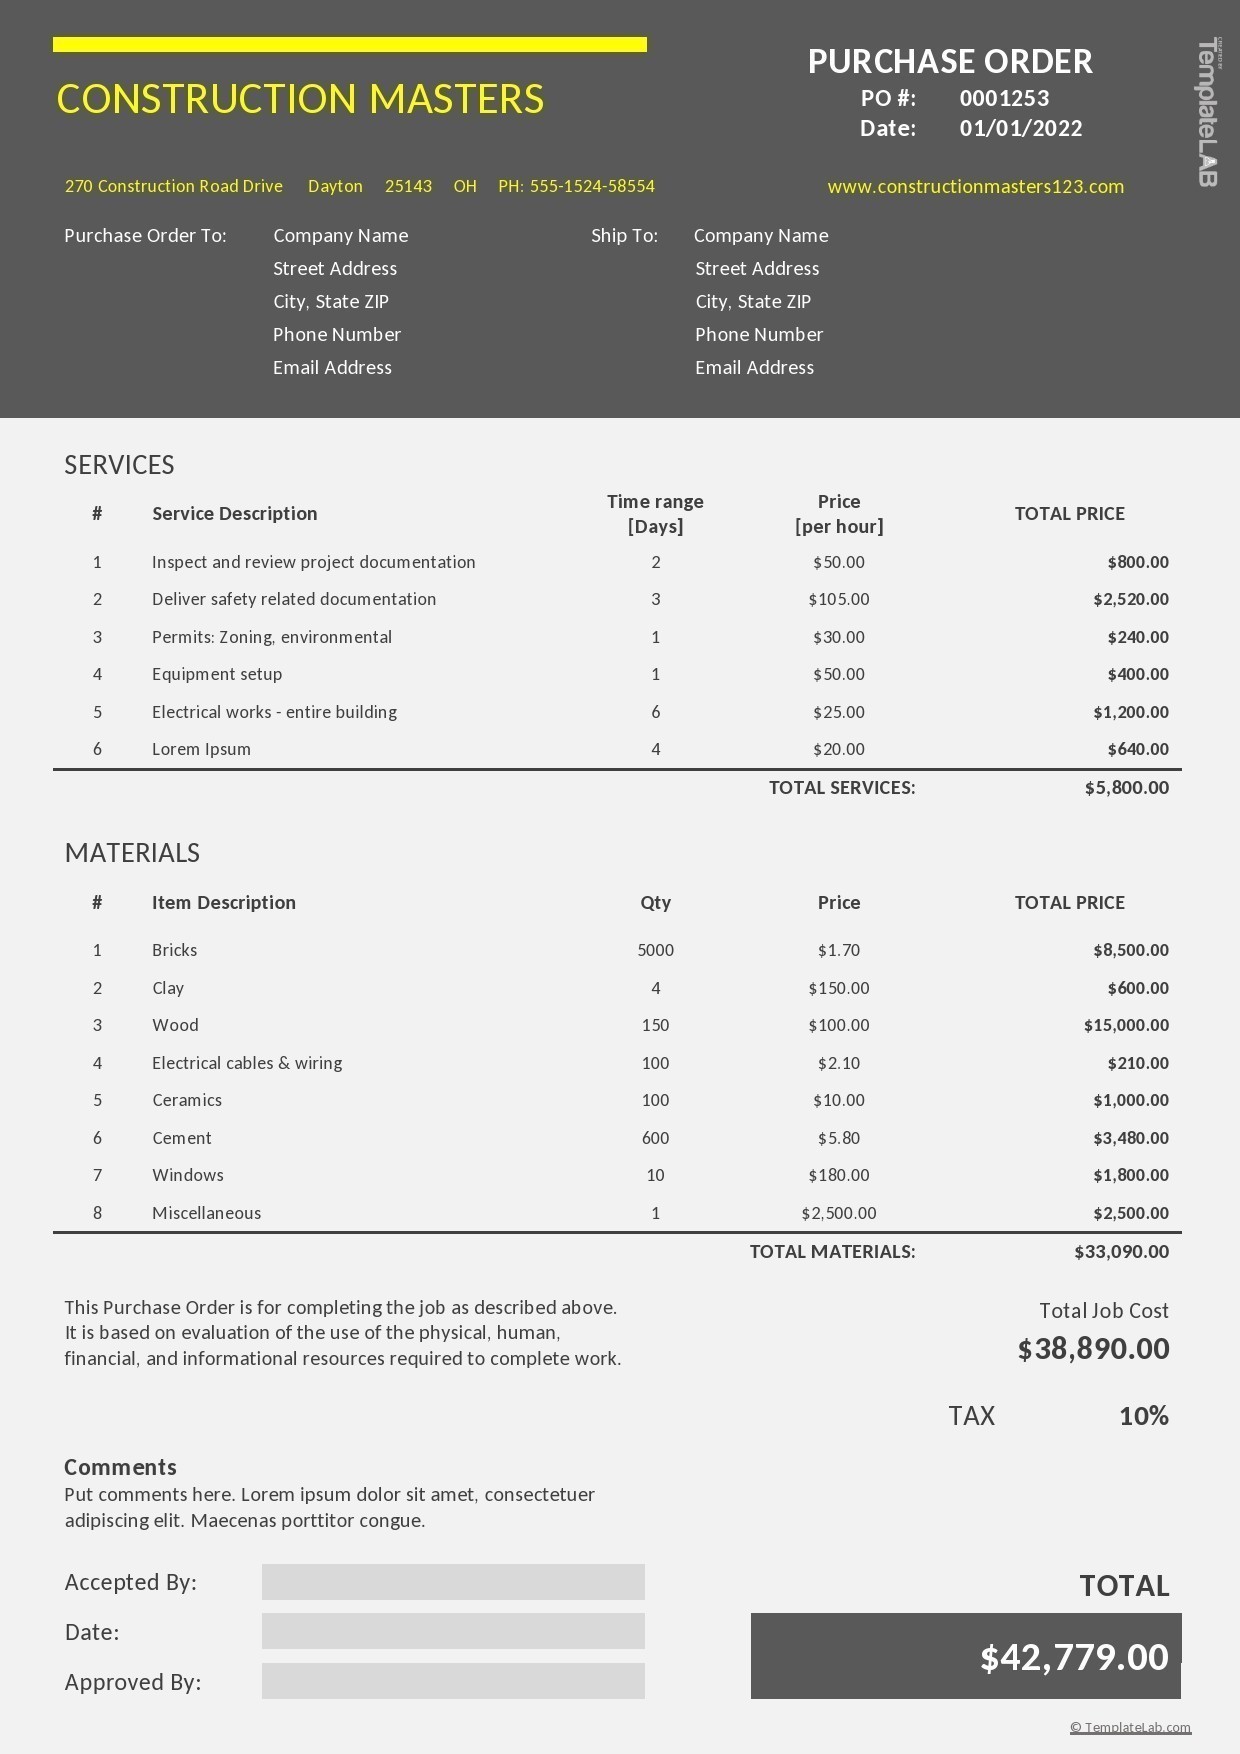 Free Construction Purchase Order Template